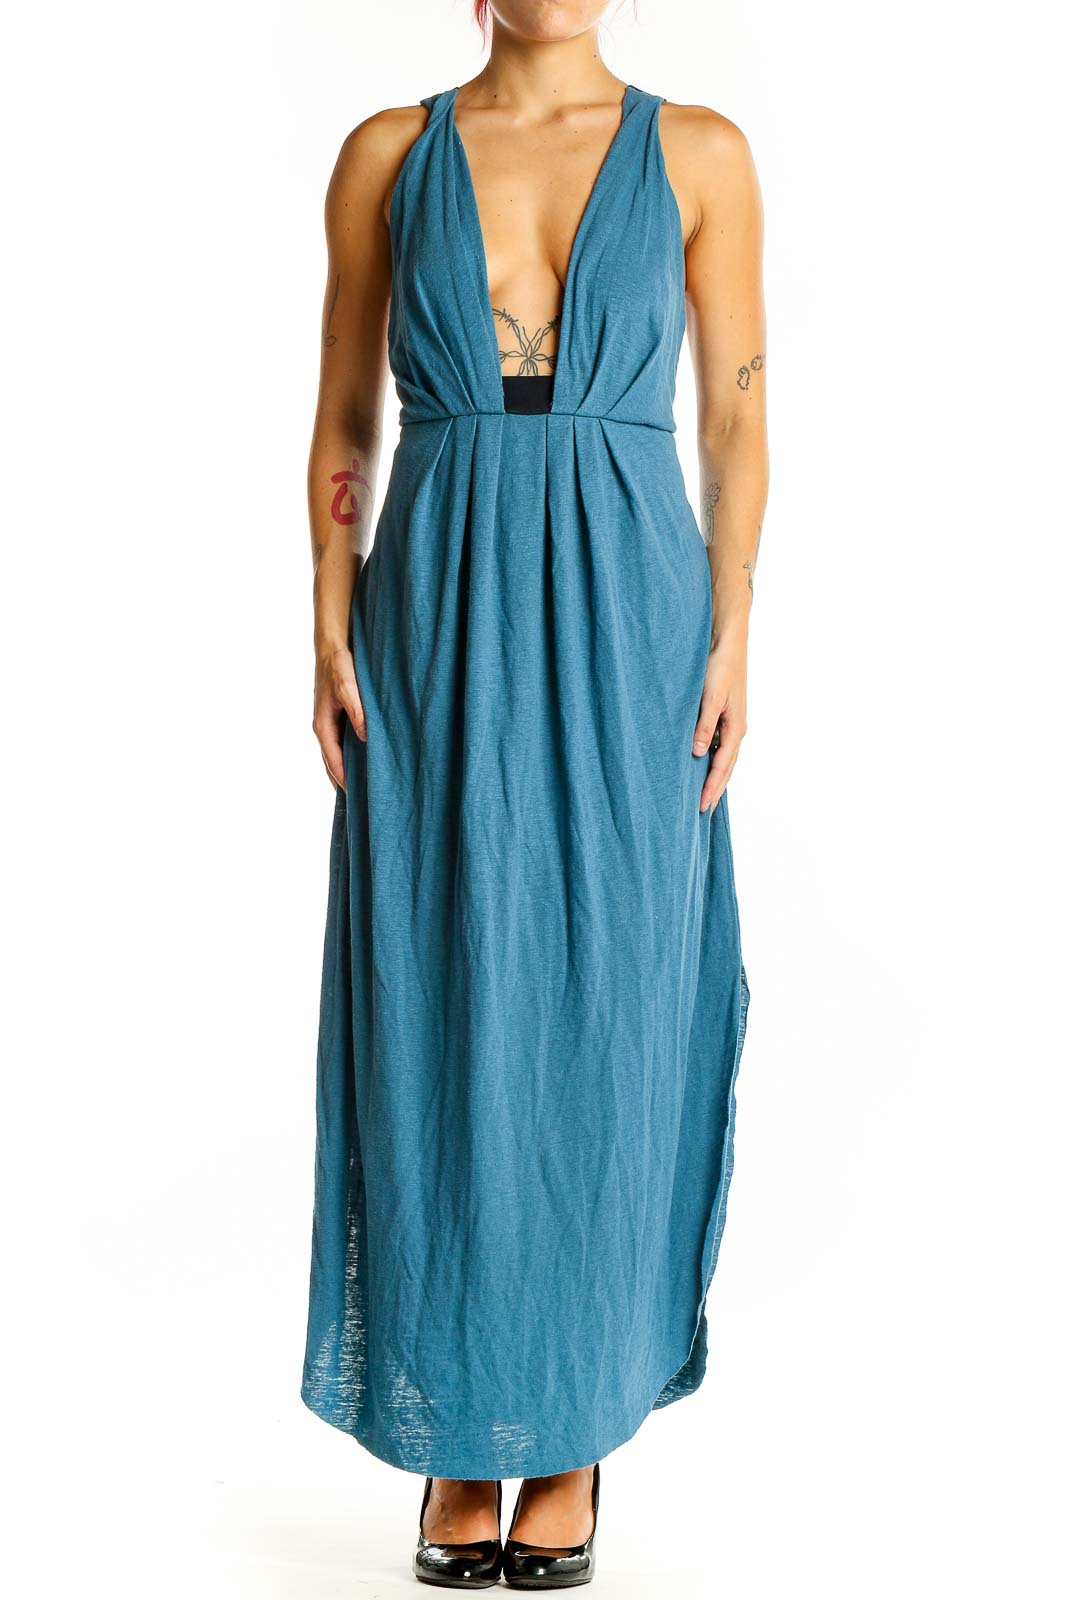 Blue Holiday Bohemian Solid Halter Dress Front